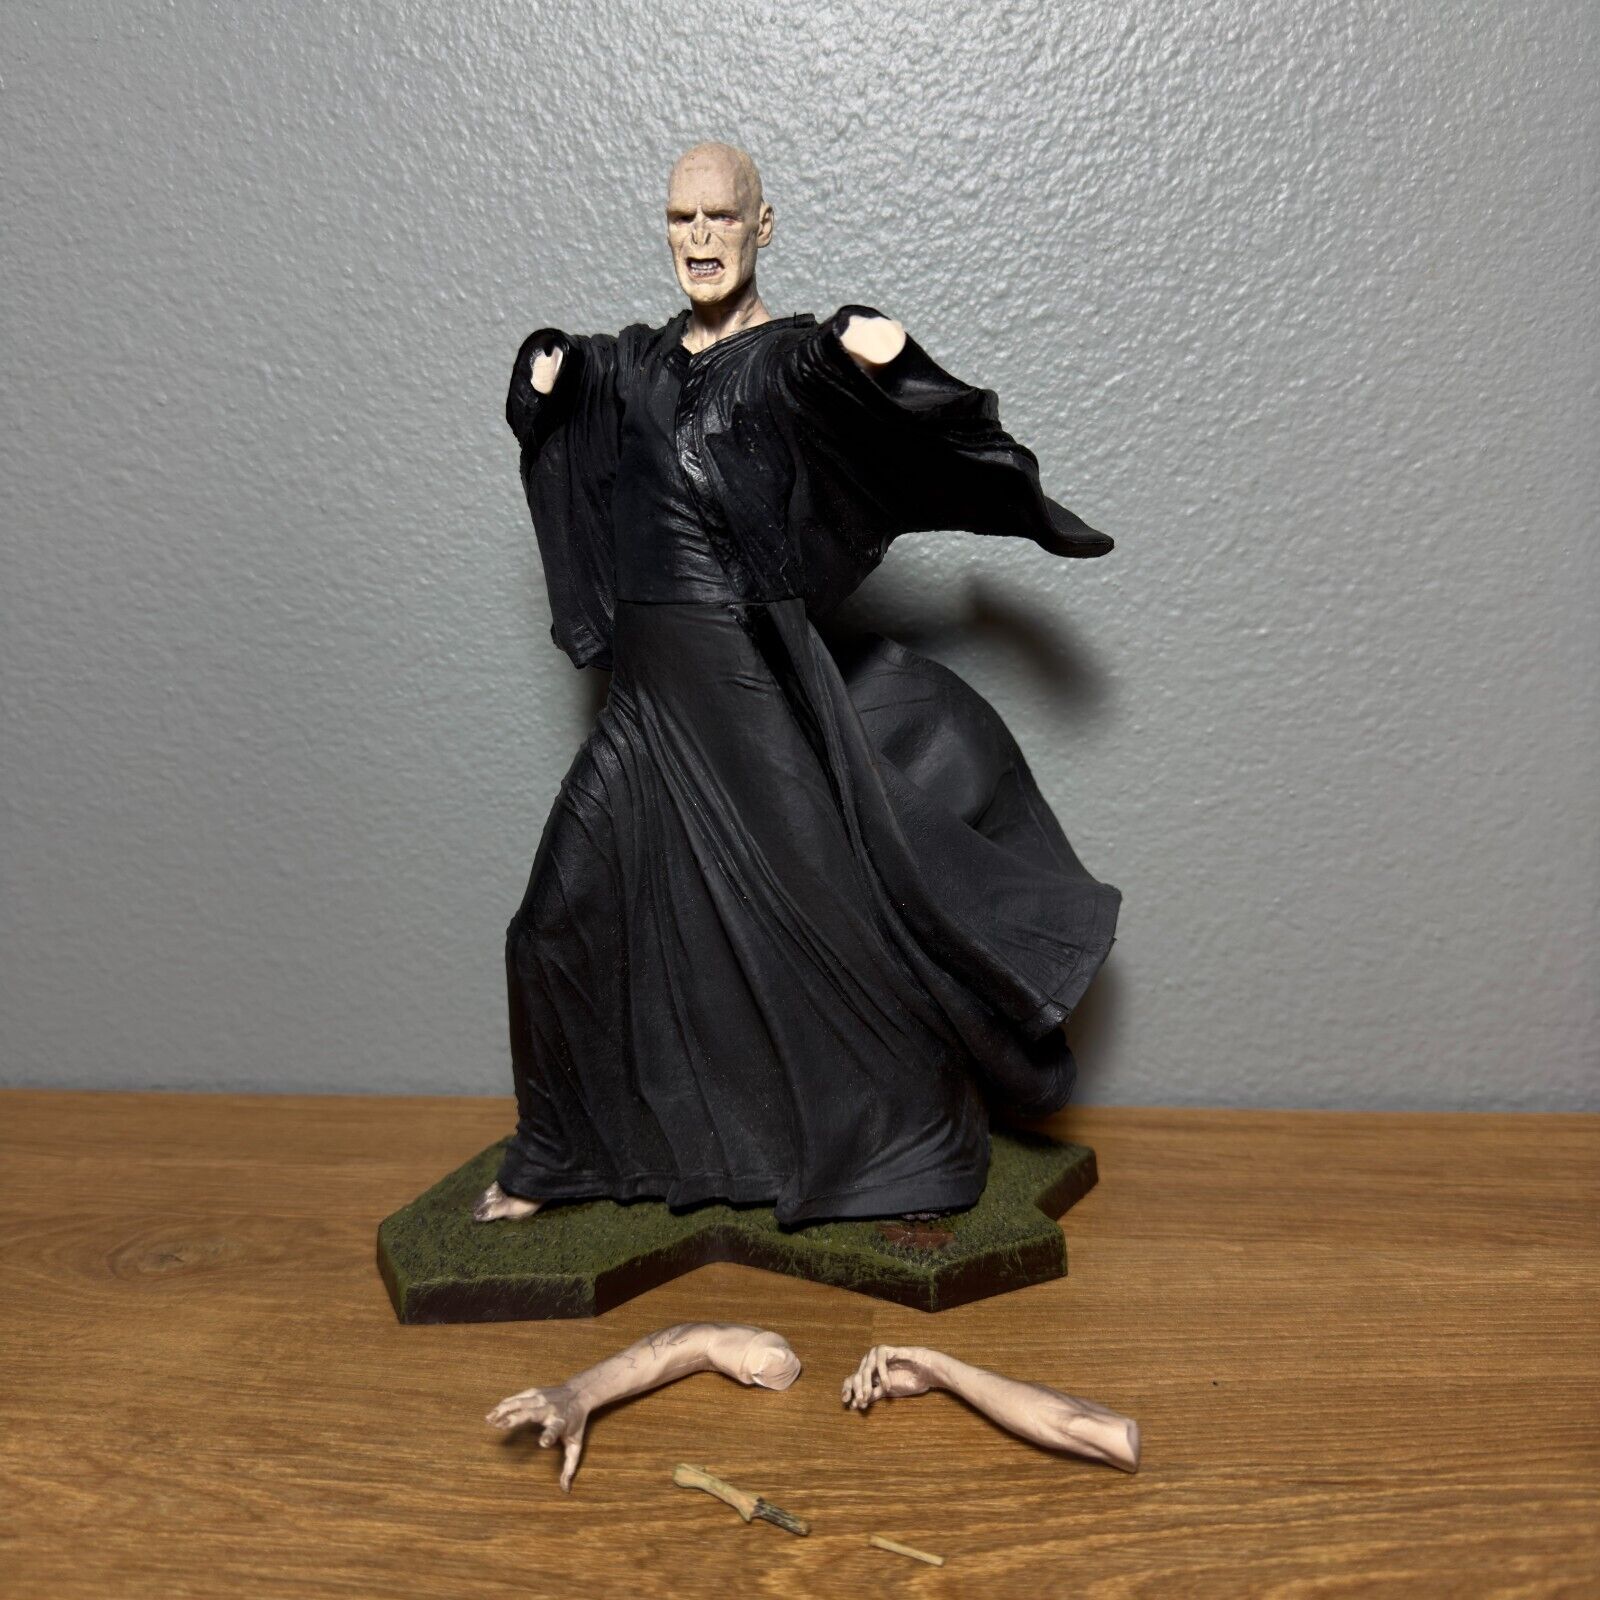 Harry Potter Voldemort Action Figure Neca Series 1 2007 Toy The Goblet of Fire